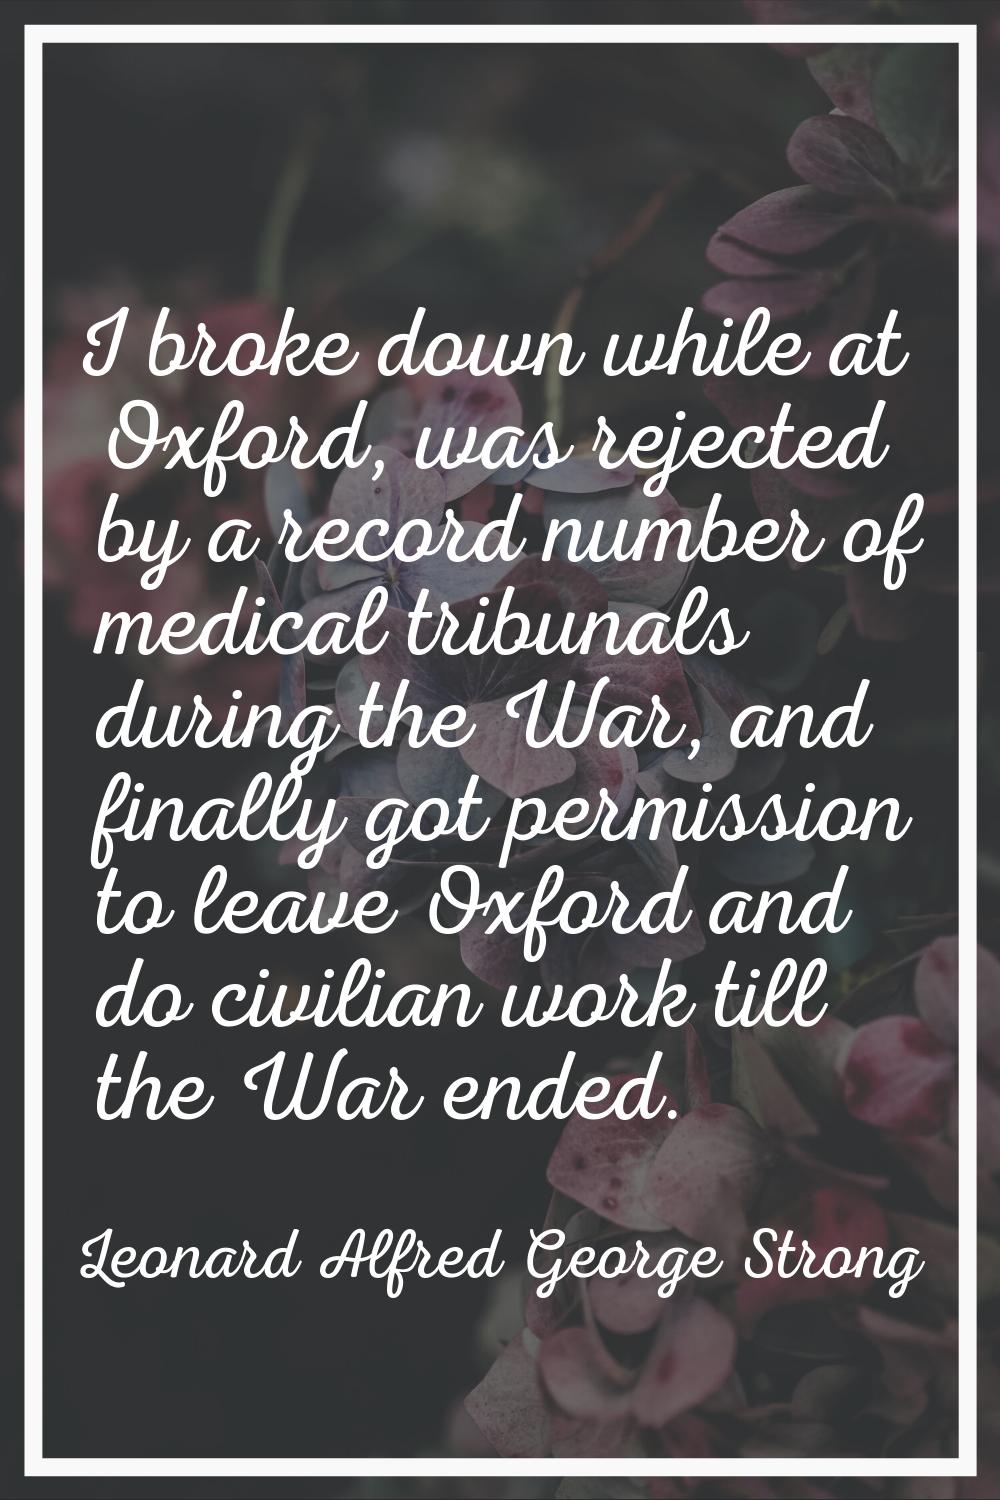 I broke down while at Oxford, was rejected by a record number of medical tribunals during the War, 